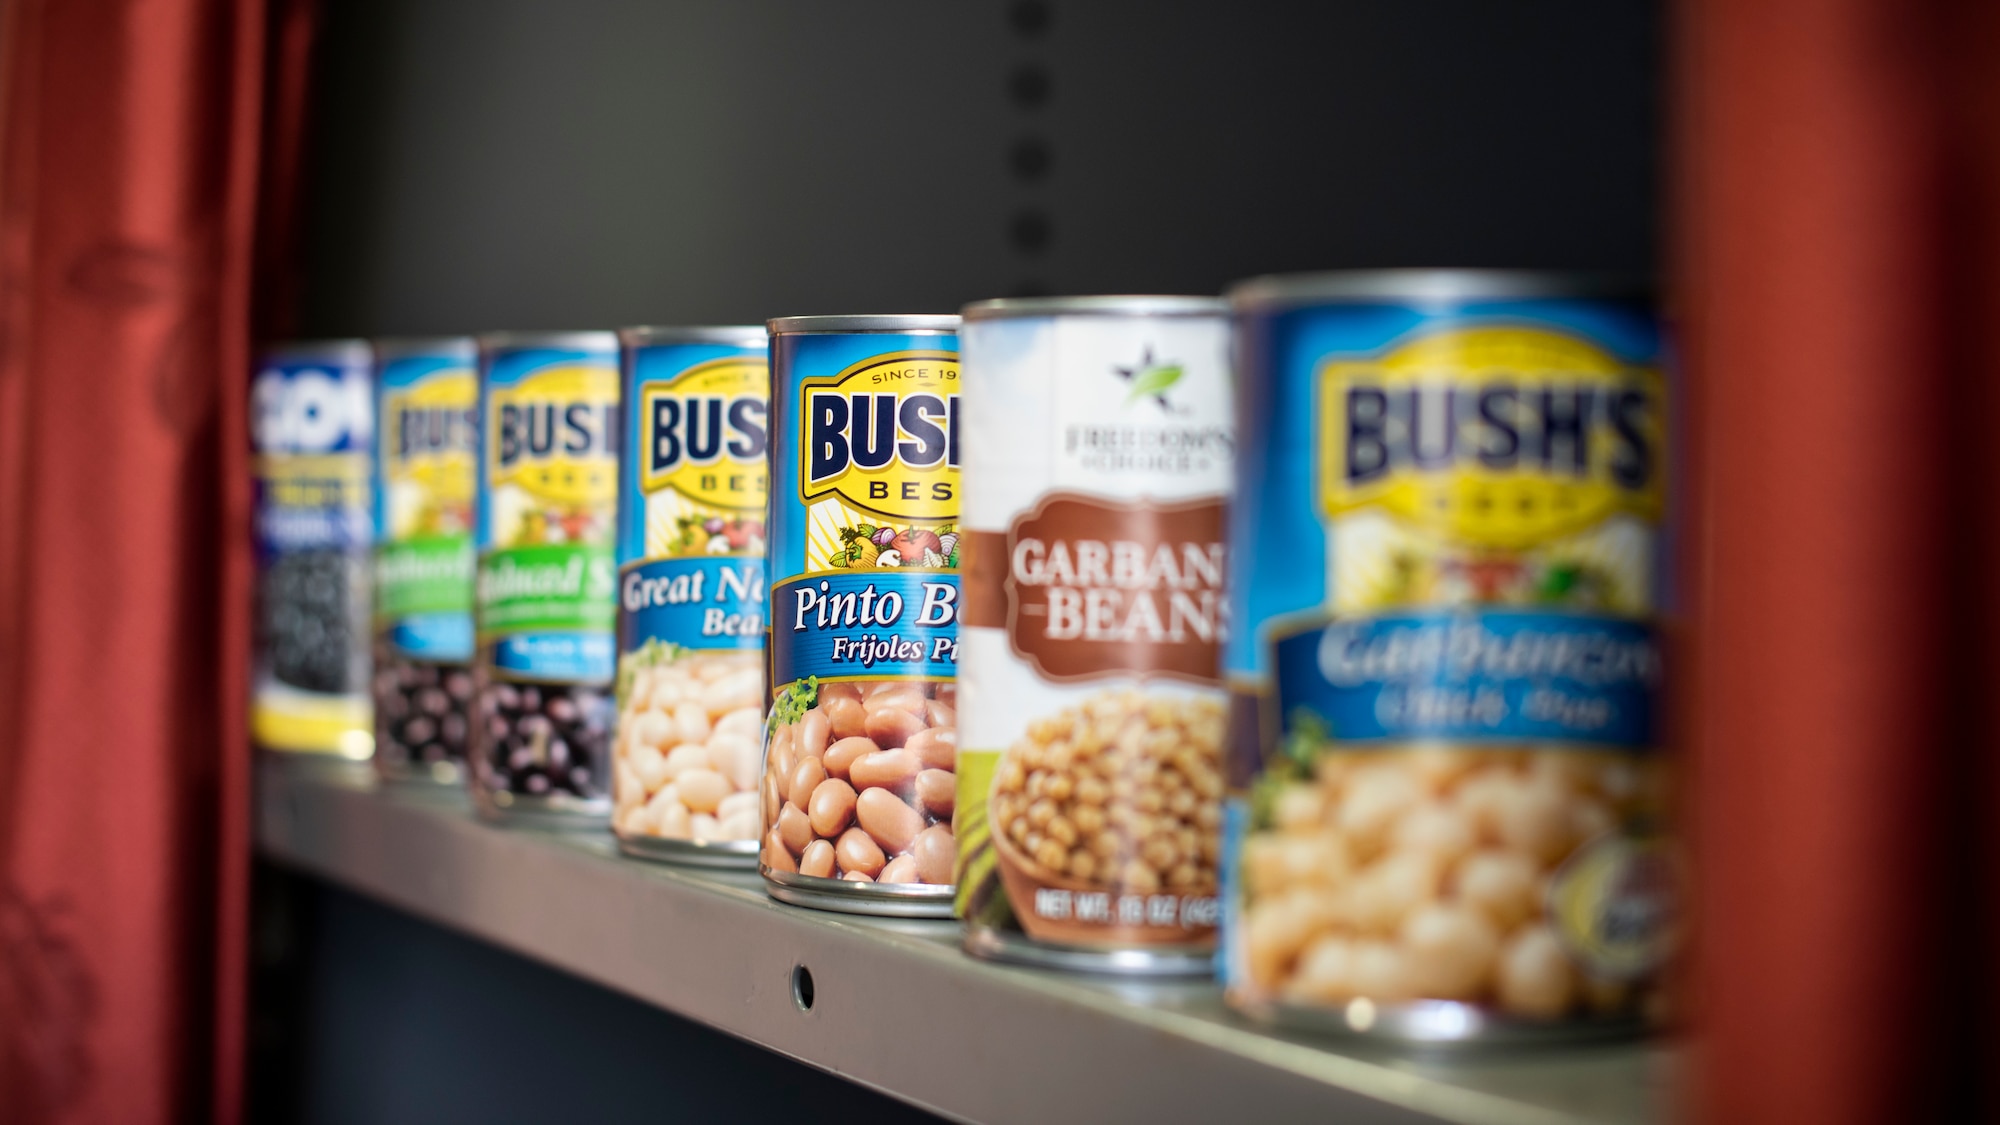 A line of canned goods sits on a shelf at the 35th Fighter Wing Pantry at Misawa Air Base, Japan, Nov. 1, 2019. The food pantry aids in community cohesion, while also providing convenient goods needed for base personnel’s readiness and sustainability. (U.S. Air Force photo by Airman 1st Class China M. Shock)